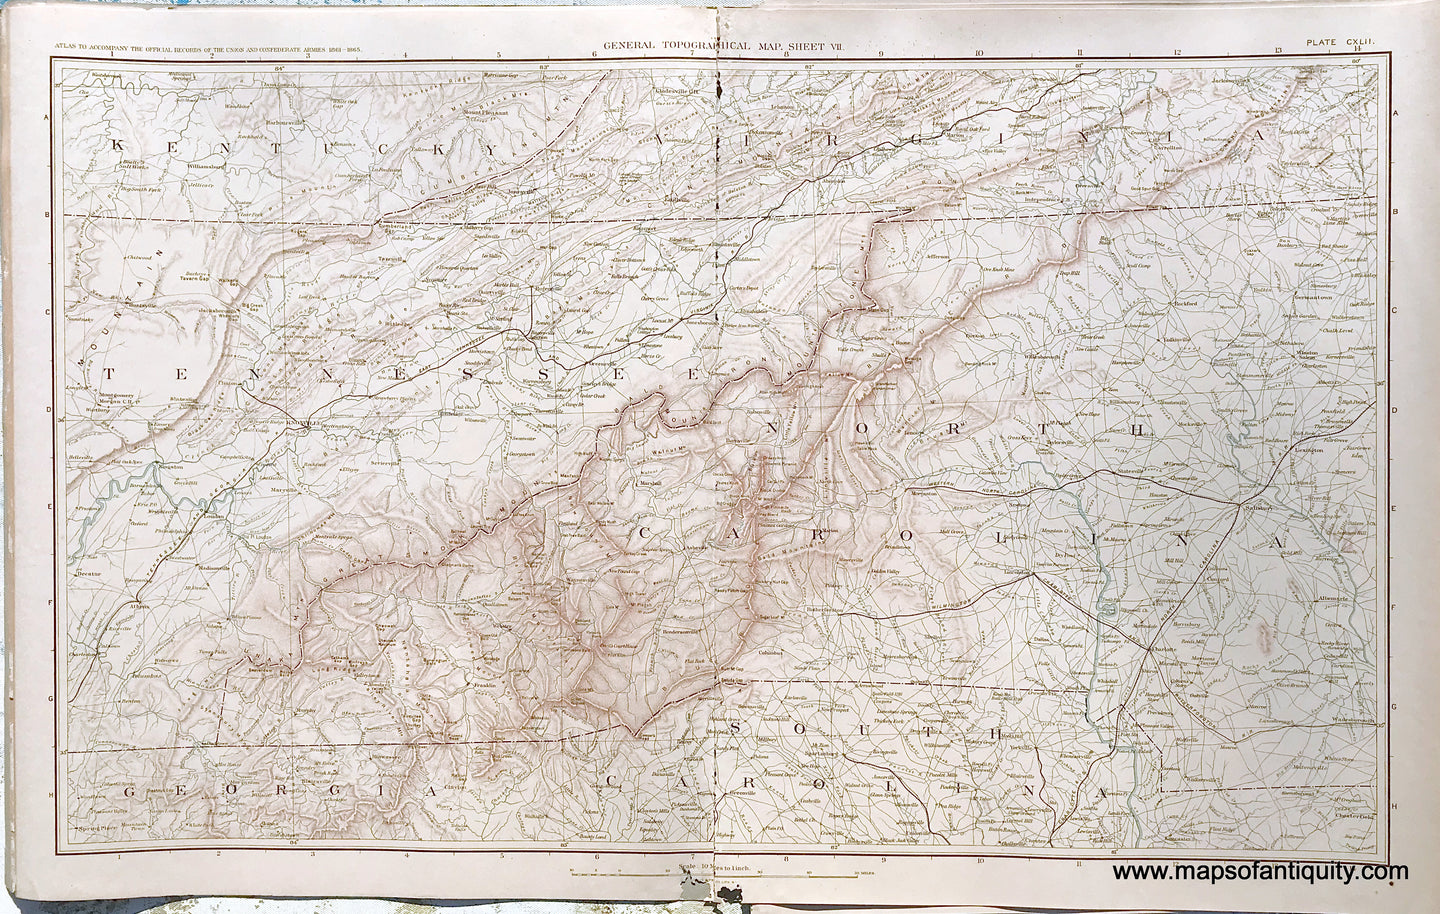 Antique-Lithograph-Print-Plate-142.-General-Topographical-Map.-Sheet-VII.-Sections-of-Kentucky-Tennessee-Virginia-North-Carolina-South-Carolina-and-Georgia.-1894-US-War-Dept.-Civil-War-Civil-War-1800s-19th-century-Maps-of-Antiquity